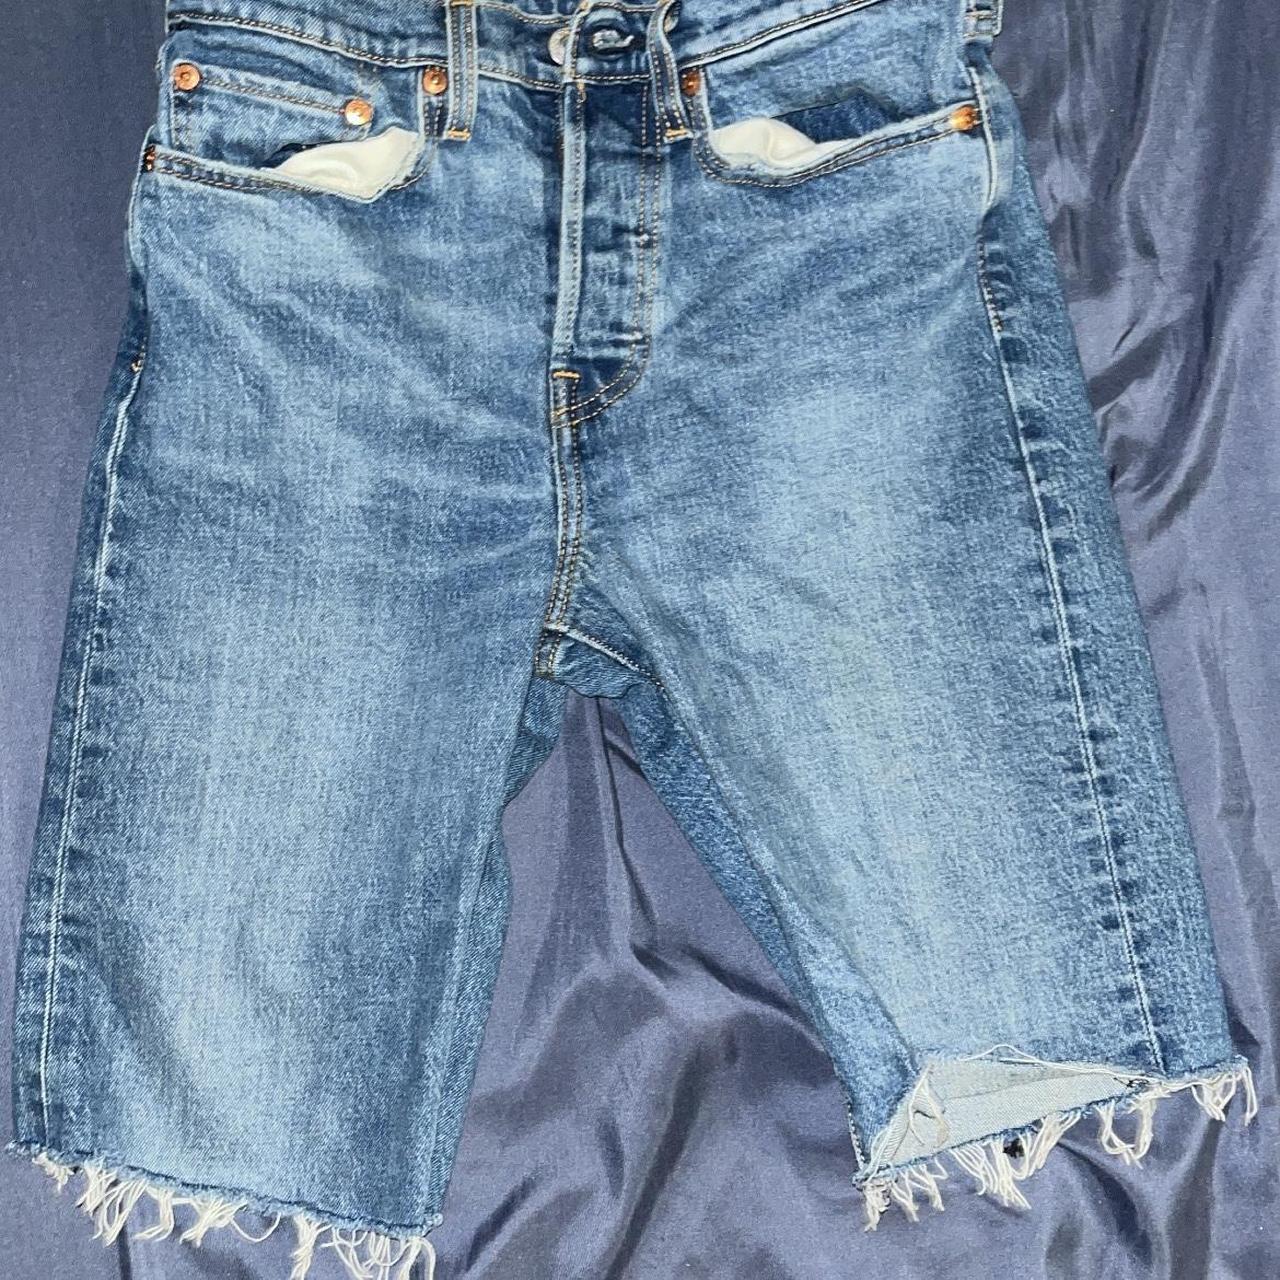 Levis jorts distressed size 27 button up they are 19... - Depop